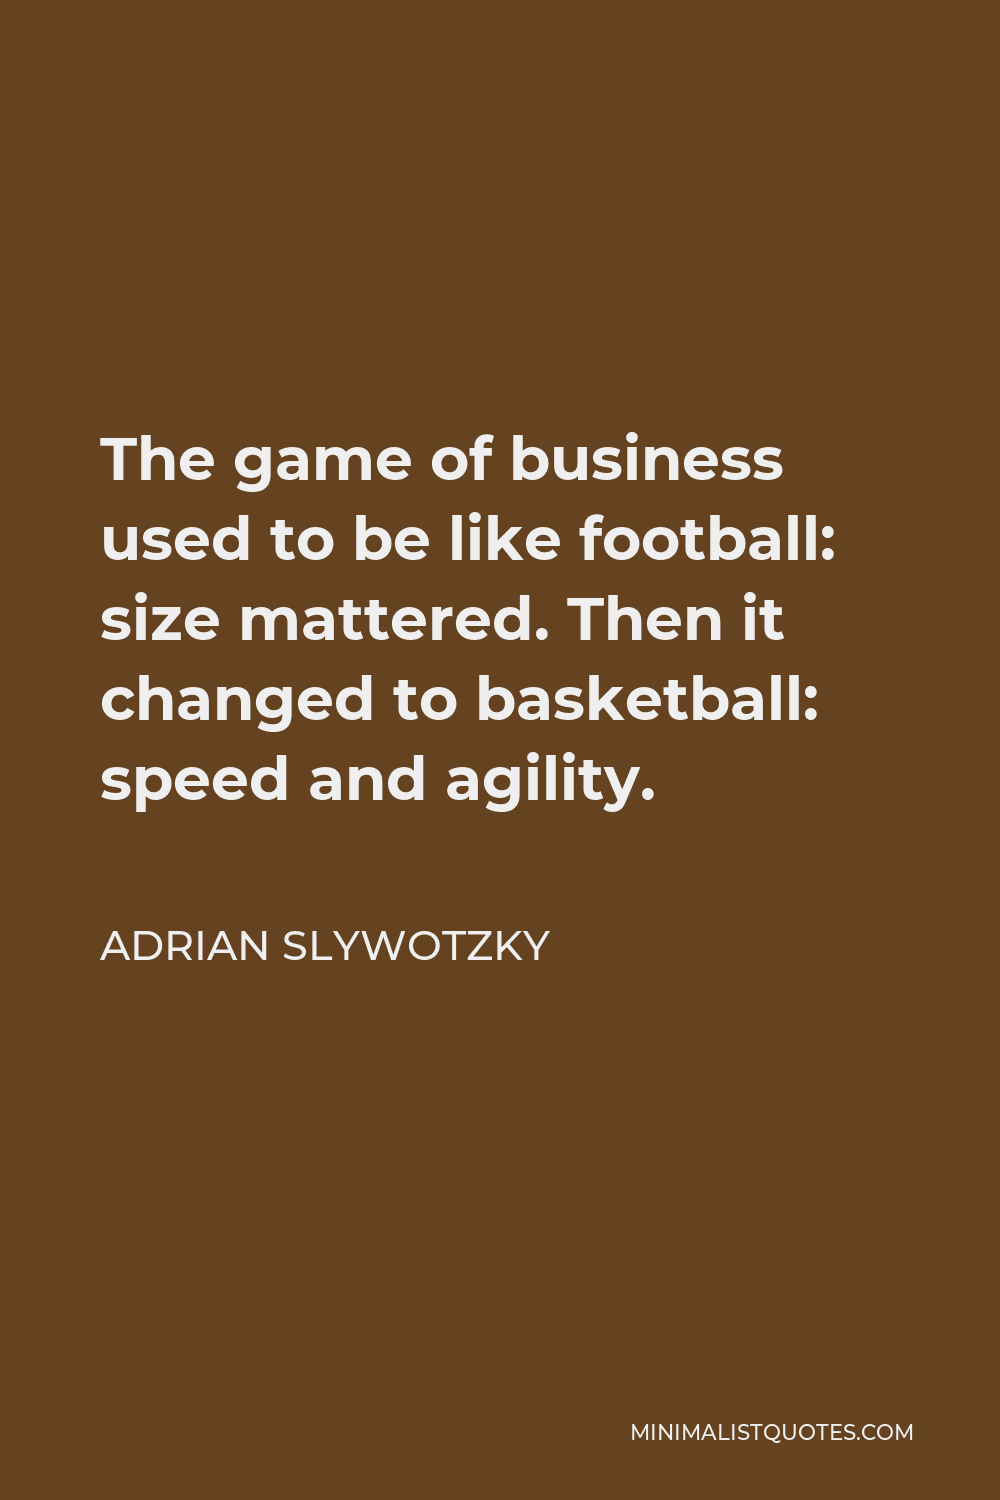 Adrian Slywotzky Quote - The game of business used to be like football: size mattered. Then it changed to basketball: speed and agility.